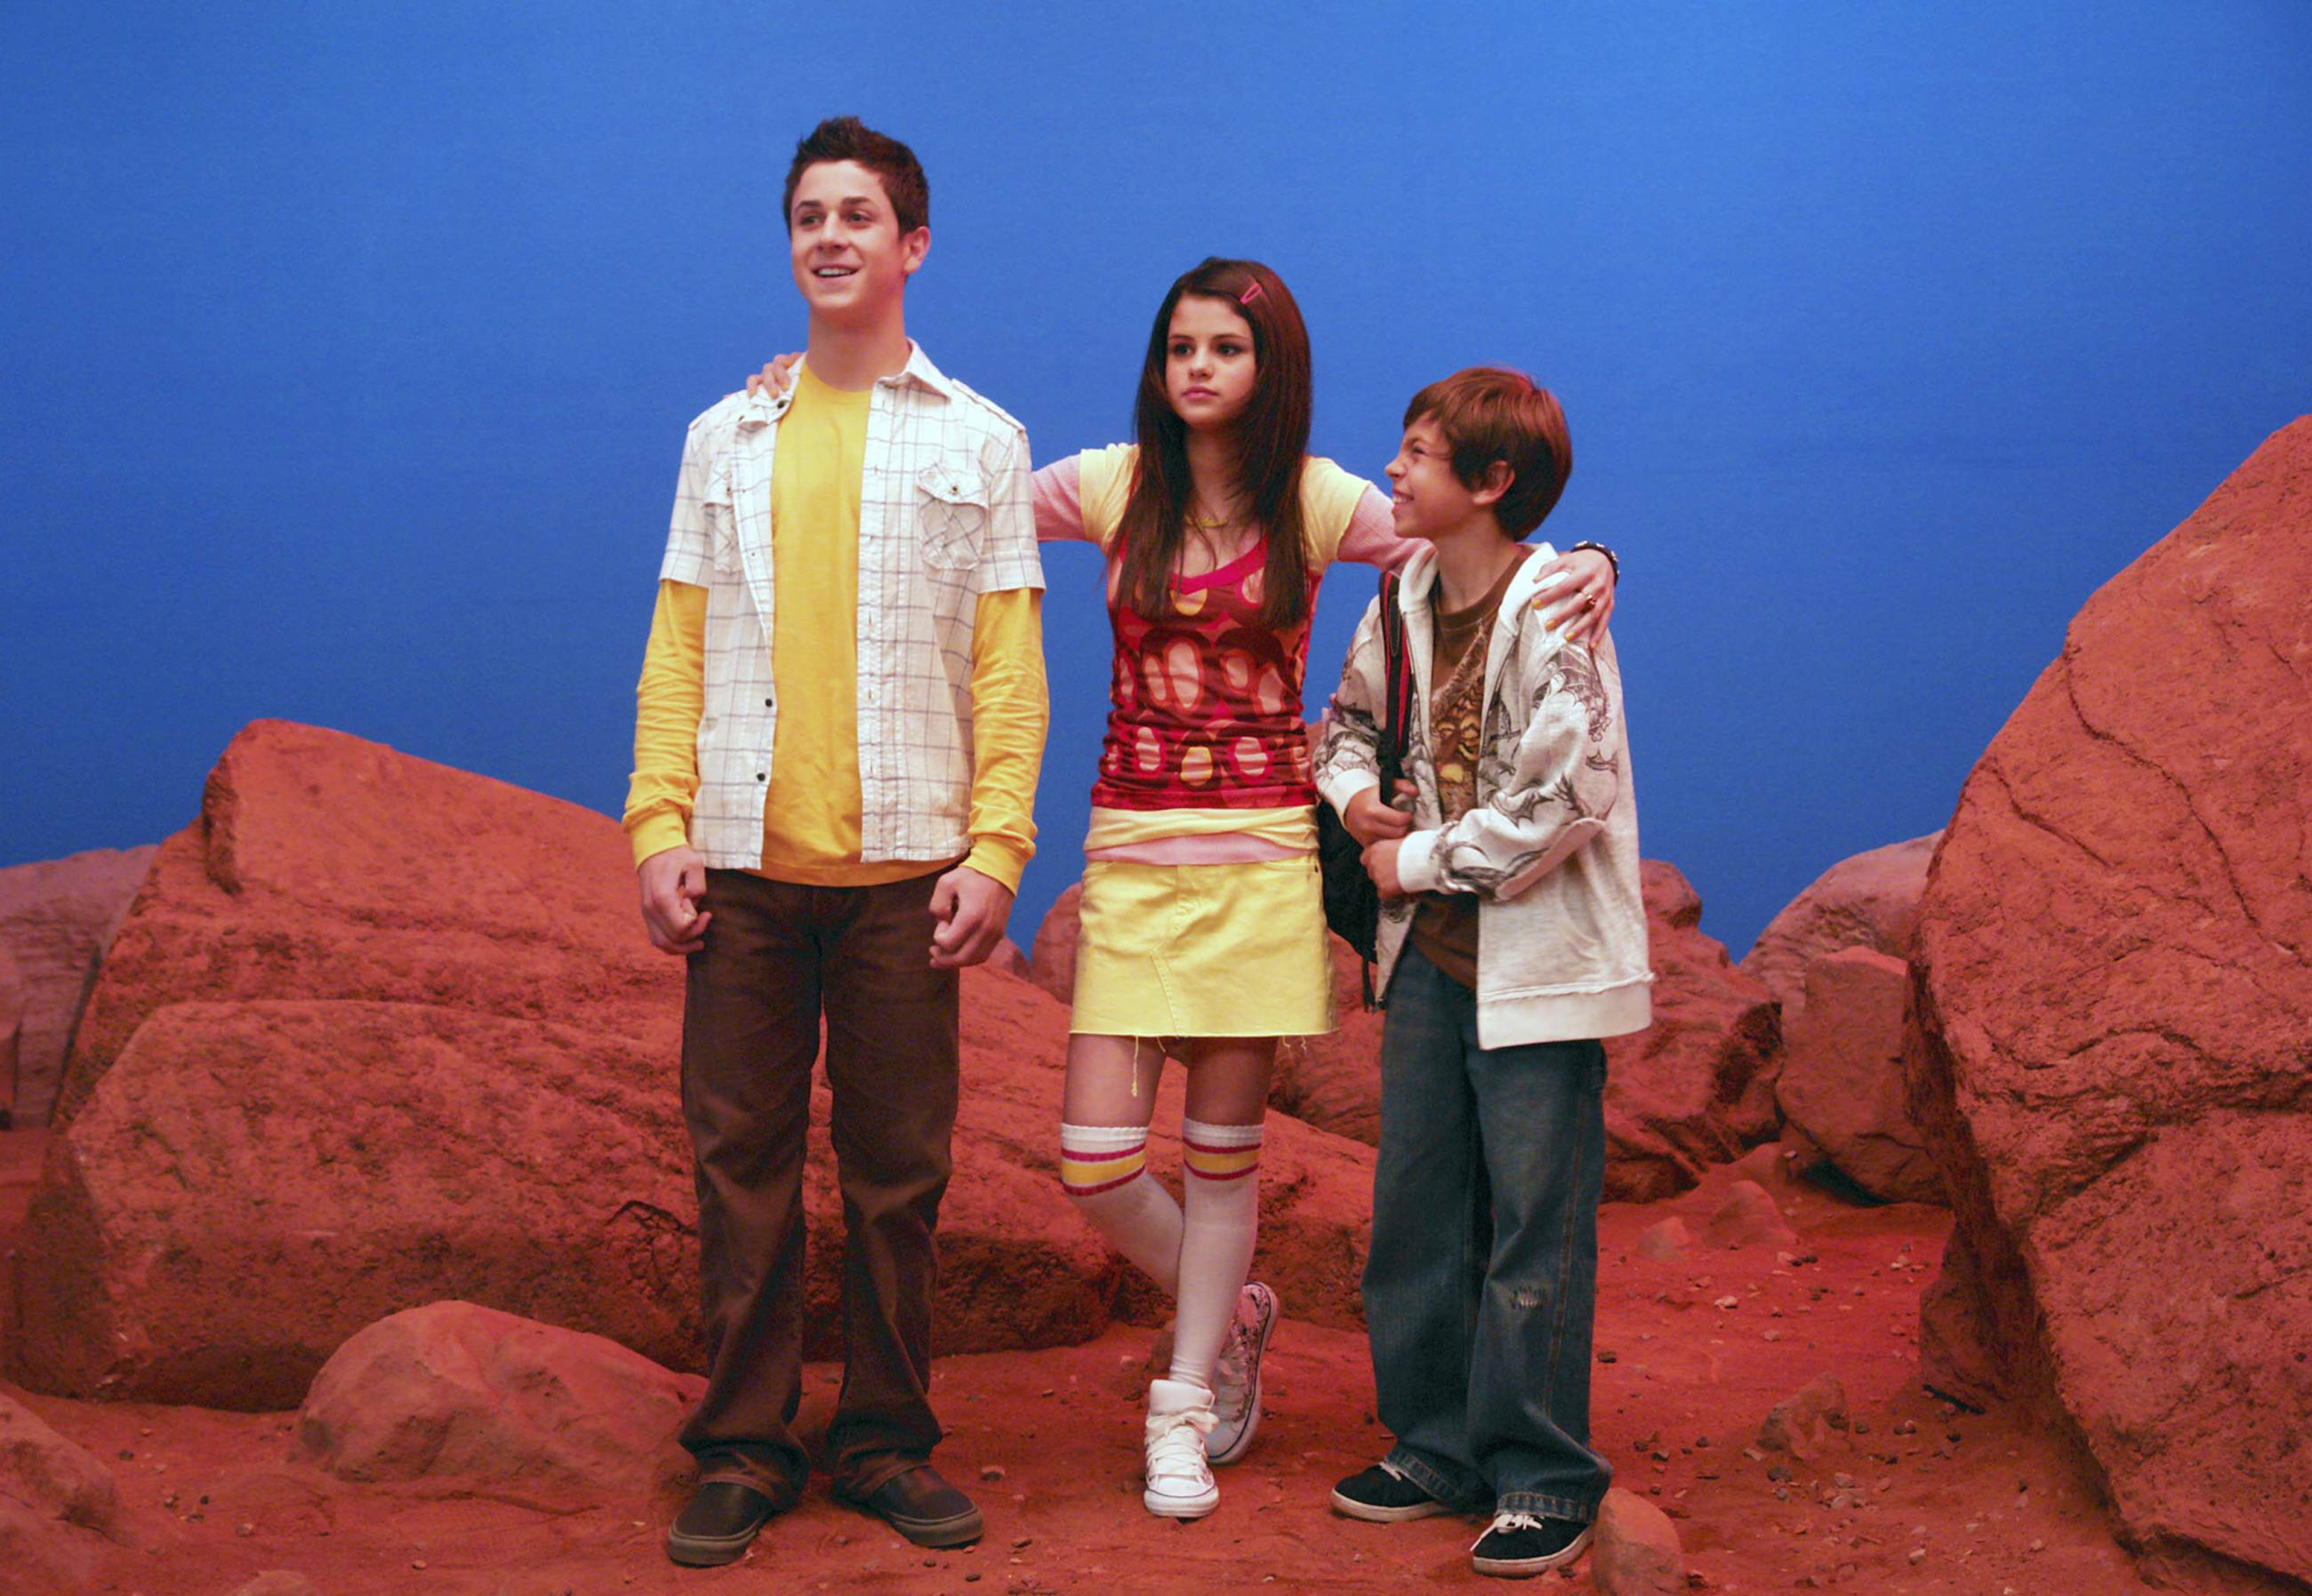 David Henrie in Wizards of Waverly Place (Season 1)